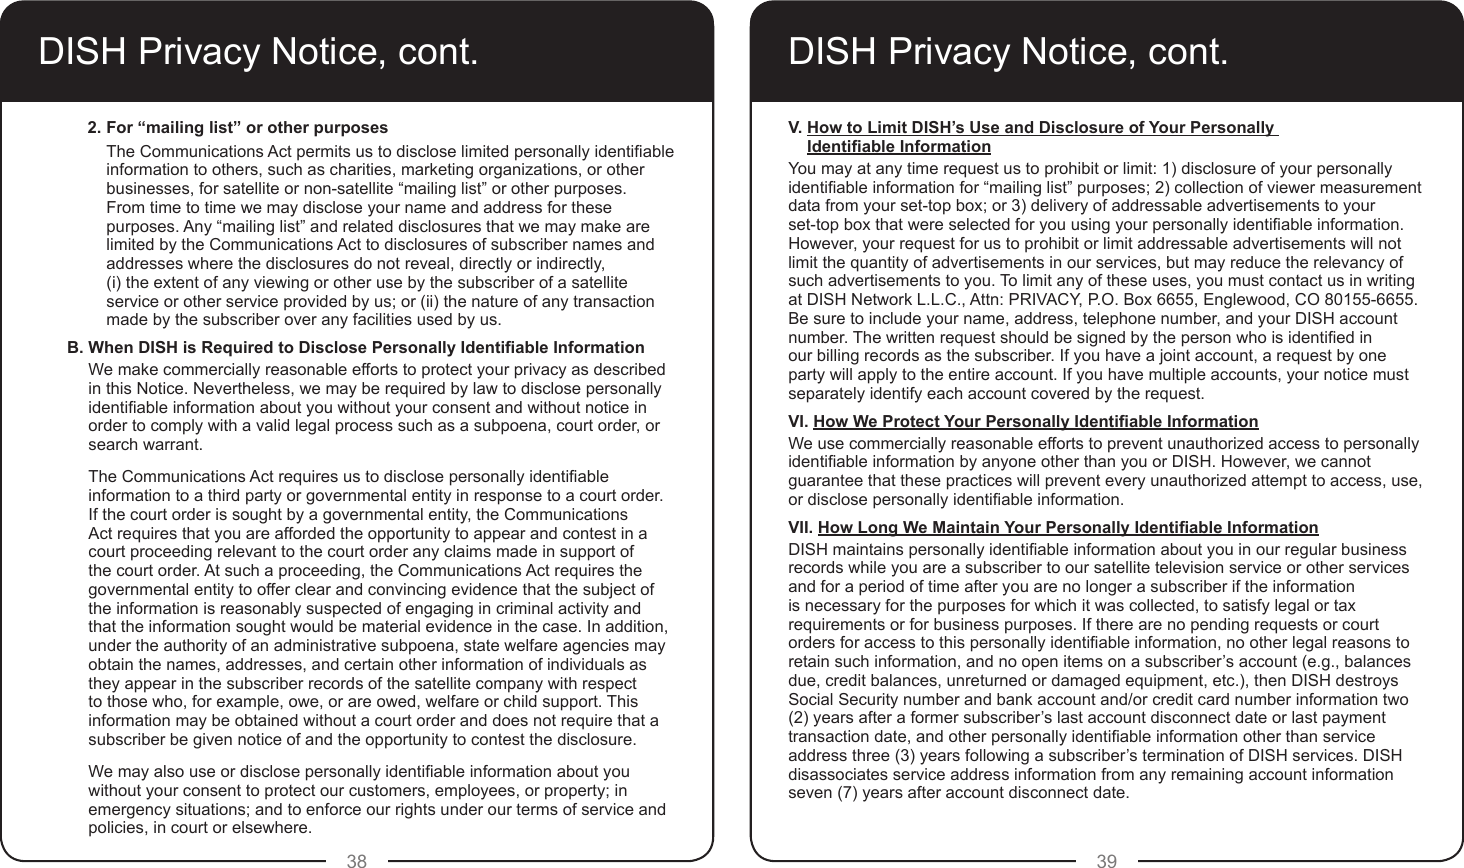 38 39DISH Privacy Notice, cont.2. For “mailing list” or other purposes The Communications Act permits us to disclose limited personally identiable information to others, such as charities, marketing organizations, or other businesses, for satellite or non-satellite “mailing list” or other purposes.  From time to time we may disclose your name and address for these purposes. Any “mailing list” and related disclosures that we may make are limited by the Communications Act to disclosures of subscriber names and addresses where the disclosures do not reveal, directly or indirectly,  (i) the extent of any viewing or other use by the subscriber of a satellite service or other service provided by us; or (ii) the nature of any transaction made by the subscriber over any facilities used by us.B. When DISH is Required to Disclose Personally Identiable InformationWe make commercially reasonable efforts to protect your privacy as described in this Notice. Nevertheless, we may be required by law to disclose personally identiable information about you without your consent and without notice in order to comply with a valid legal process such as a subpoena, court order, or search warrant.The Communications Act requires us to disclose personally identiable information to a third party or governmental entity in response to a court order. If the court order is sought by a governmental entity, the Communications Act requires that you are afforded the opportunity to appear and contest in a court proceeding relevant to the court order any claims made in support of the court order. At such a proceeding, the Communications Act requires the governmental entity to offer clear and convincing evidence that the subject of the information is reasonably suspected of engaging in criminal activity and that the information sought would be material evidence in the case. In addition, under the authority of an administrative subpoena, state welfare agencies may obtain the names, addresses, and certain other information of individuals as they appear in the subscriber records of the satellite company with respect to those who, for example, owe, or are owed, welfare or child support. This information may be obtained without a court order and does not require that a subscriber be given notice of and the opportunity to contest the disclosure.We may also use or disclose personally identiable information about you without your consent to protect our customers, employees, or property; in emergency situations; and to enforce our rights under our terms of service and policies, in court or elsewhere.DISH Privacy Notice, cont.V. How to Limit DISH’s Use and Disclosure of Your Personally Identiable InformationYou may at any time request us to prohibit or limit: 1) disclosure of your personally identiable information for “mailing list” purposes; 2) collection of viewer measurement data from your set-top box; or 3) delivery of addressable advertisements to your  set-top box that were selected for you using your personally identiable information. However, your request for us to prohibit or limit addressable advertisements will not limit the quantity of advertisements in our services, but may reduce the relevancy of such advertisements to you. To limit any of these uses, you must contact us in writing at DISH Network L.L.C., Attn: PRIVACY, P.O. Box 6655, Englewood, CO 80155-6655. Be sure to include your name, address, telephone number, and your DISH account number. The written request should be signed by the person who is identied in our billing records as the subscriber. If you have a joint account, a request by one party will apply to the entire account. If you have multiple accounts, your notice must separately identify each account covered by the request.VI. How We Protect Your Personally Identiable InformationWe use commercially reasonable efforts to prevent unauthorized access to personally identiable information by anyone other than you or DISH. However, we cannot guarantee that these practices will prevent every unauthorized attempt to access, use, or disclose personally identiable information.VII. How Long We Maintain Your Personally Identiable InformationDISH maintains personally identiable information about you in our regular business records while you are a subscriber to our satellite television service or other services and for a period of time after you are no longer a subscriber if the information is necessary for the purposes for which it was collected, to satisfy legal or tax requirements or for business purposes. If there are no pending requests or court orders for access to this personally identiable information, no other legal reasons to retain such information, and no open items on a subscriber’s account (e.g., balances due, credit balances, unreturned or damaged equipment, etc.), then DISH destroys Social Security number and bank account and/or credit card number information two (2) years after a former subscriber’s last account disconnect date or last payment transaction date, and other personally identiable information other than service address three (3) years following a subscriber’s termination of DISH services. DISH disassociates service address information from any remaining account information seven (7) years after account disconnect date.